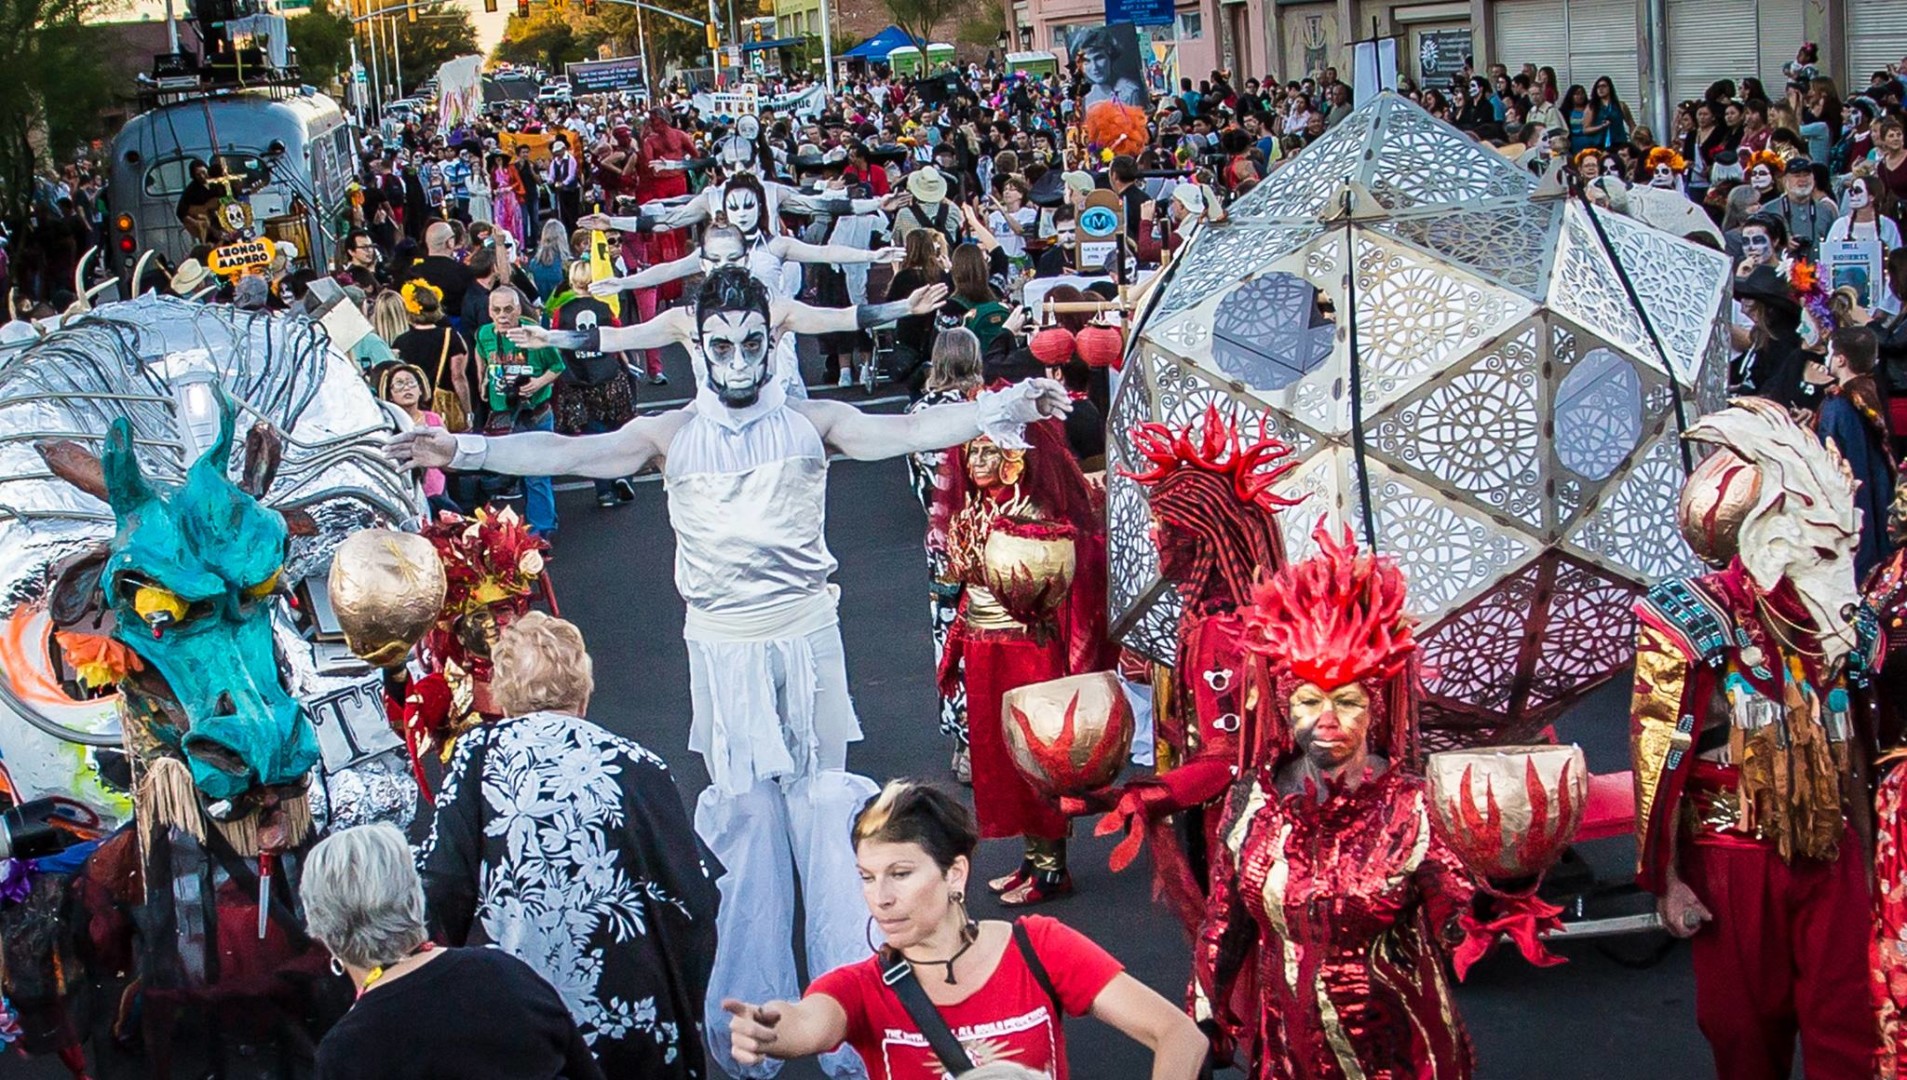 "When is the Day of the Dead Parade?" All Souls Procession